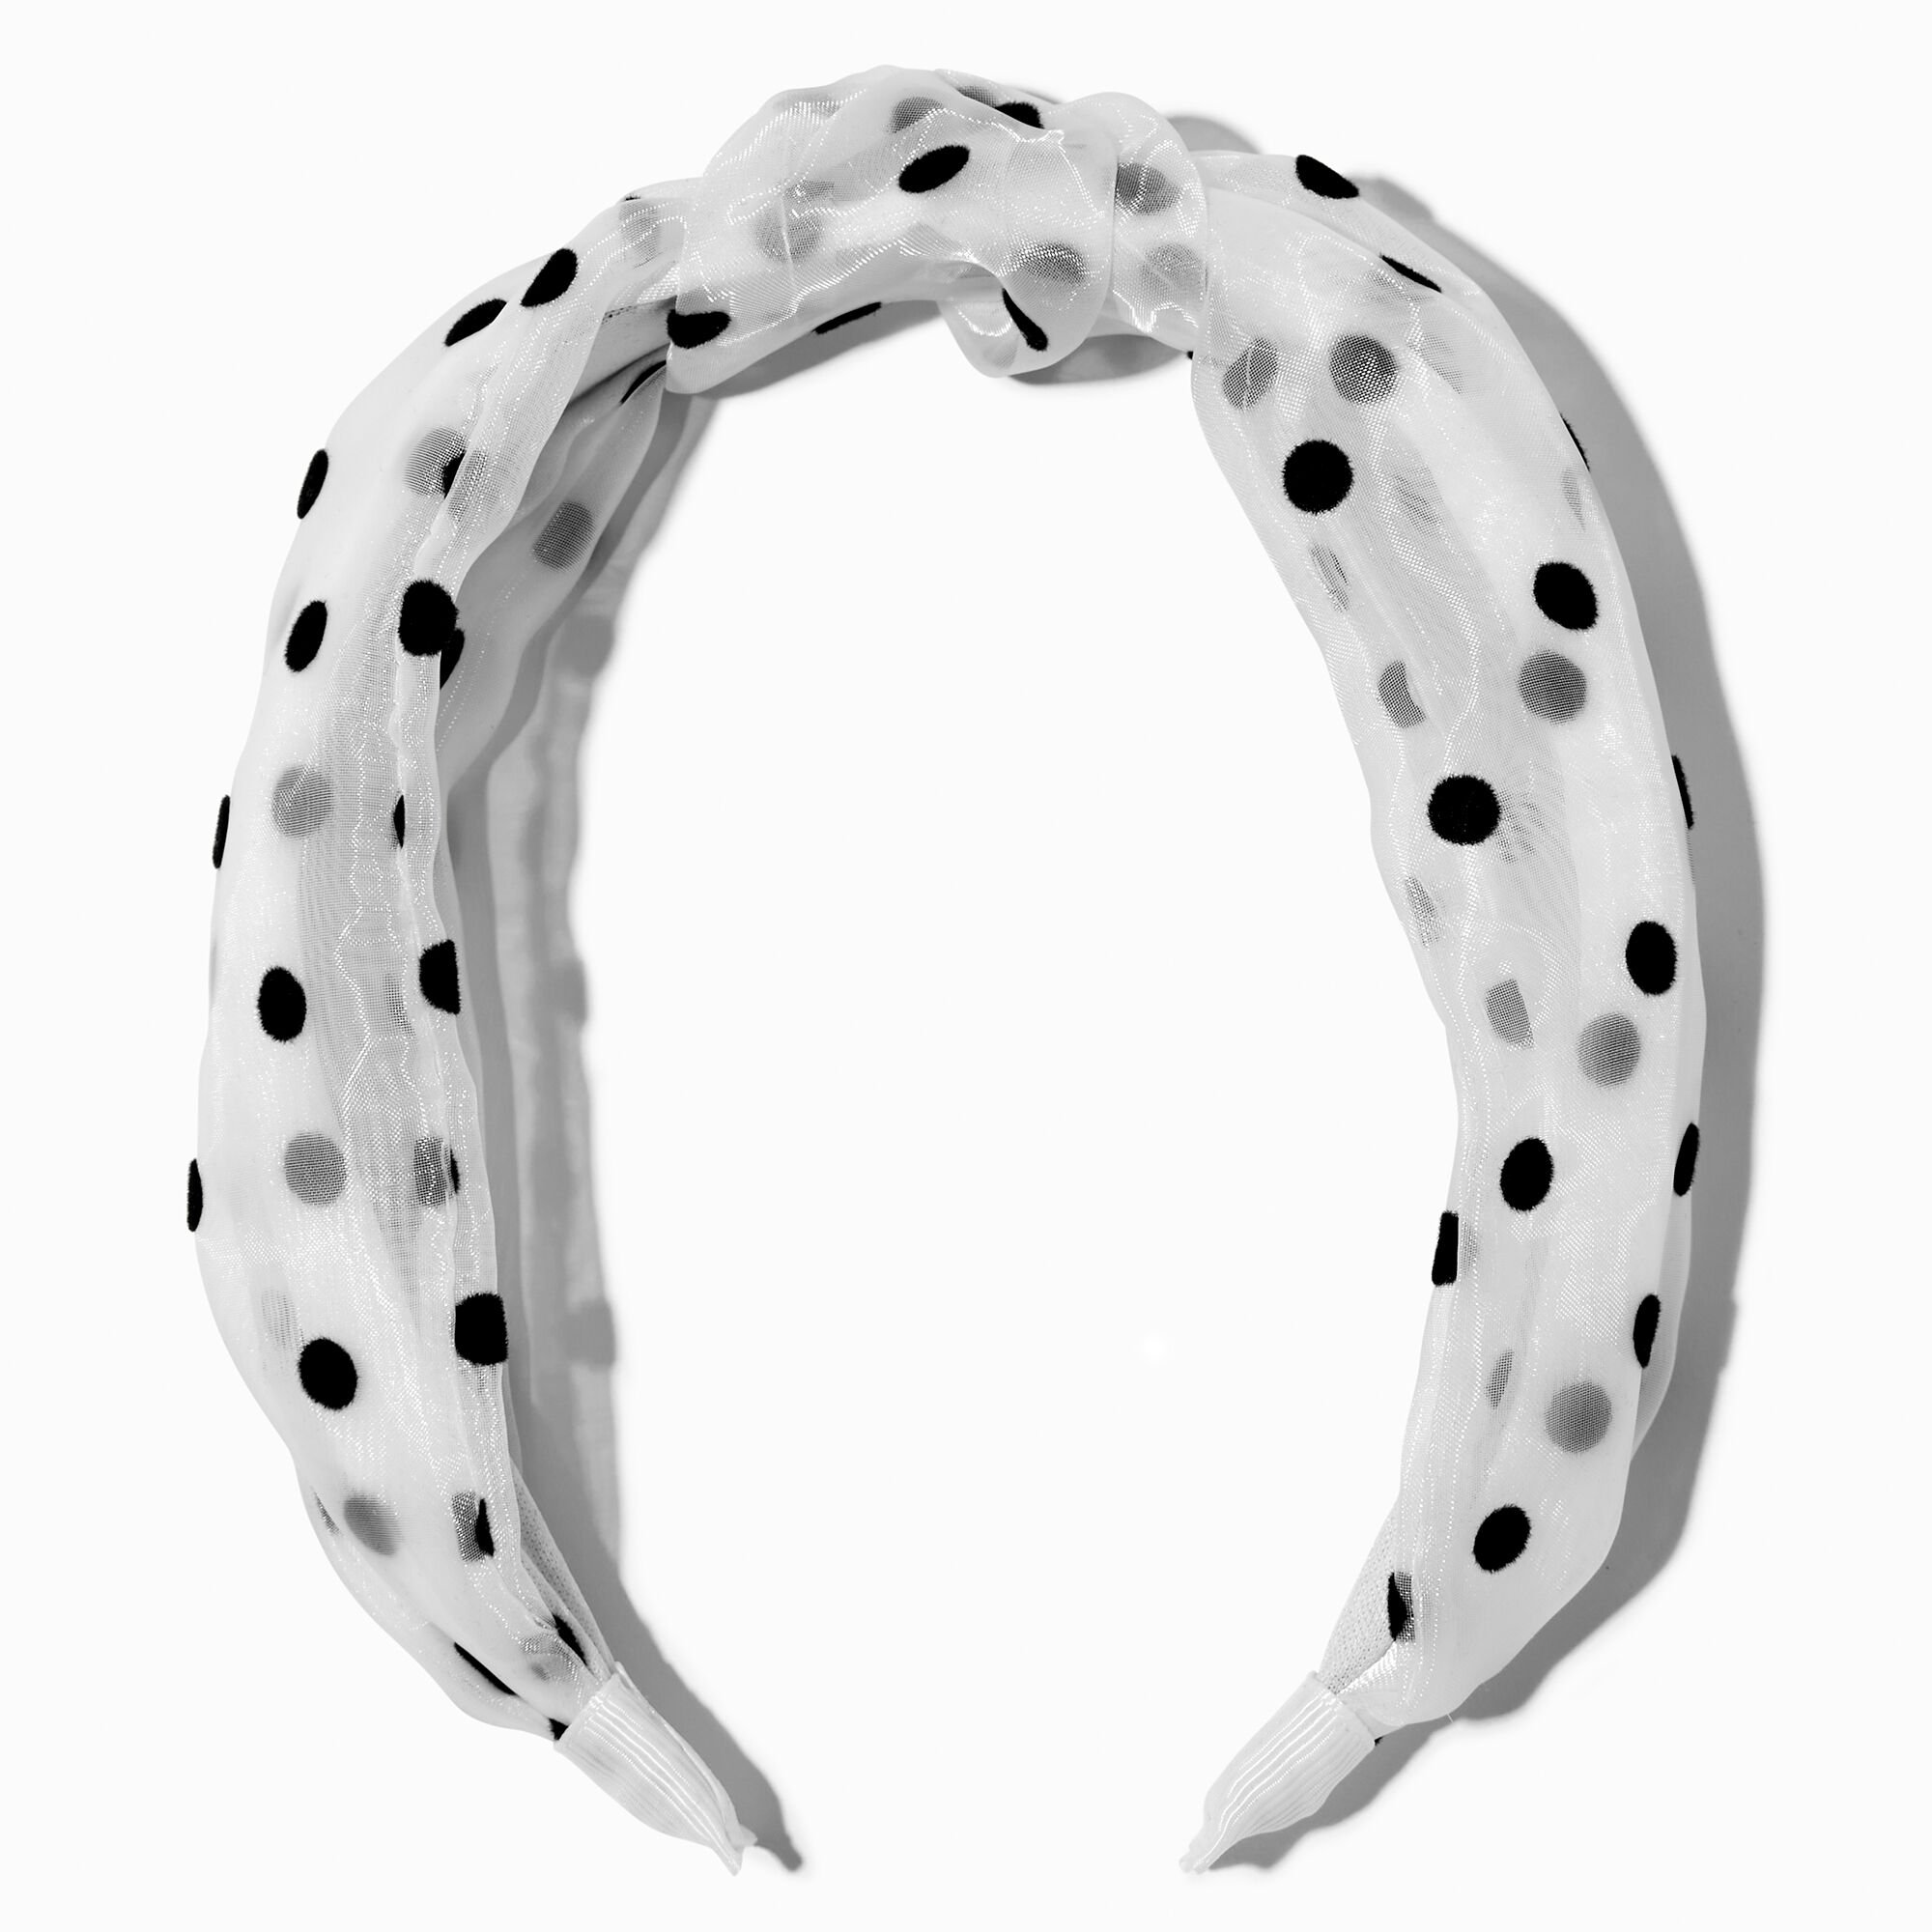 View Claires Black Polka Dot Sheer Knotted Headband White information